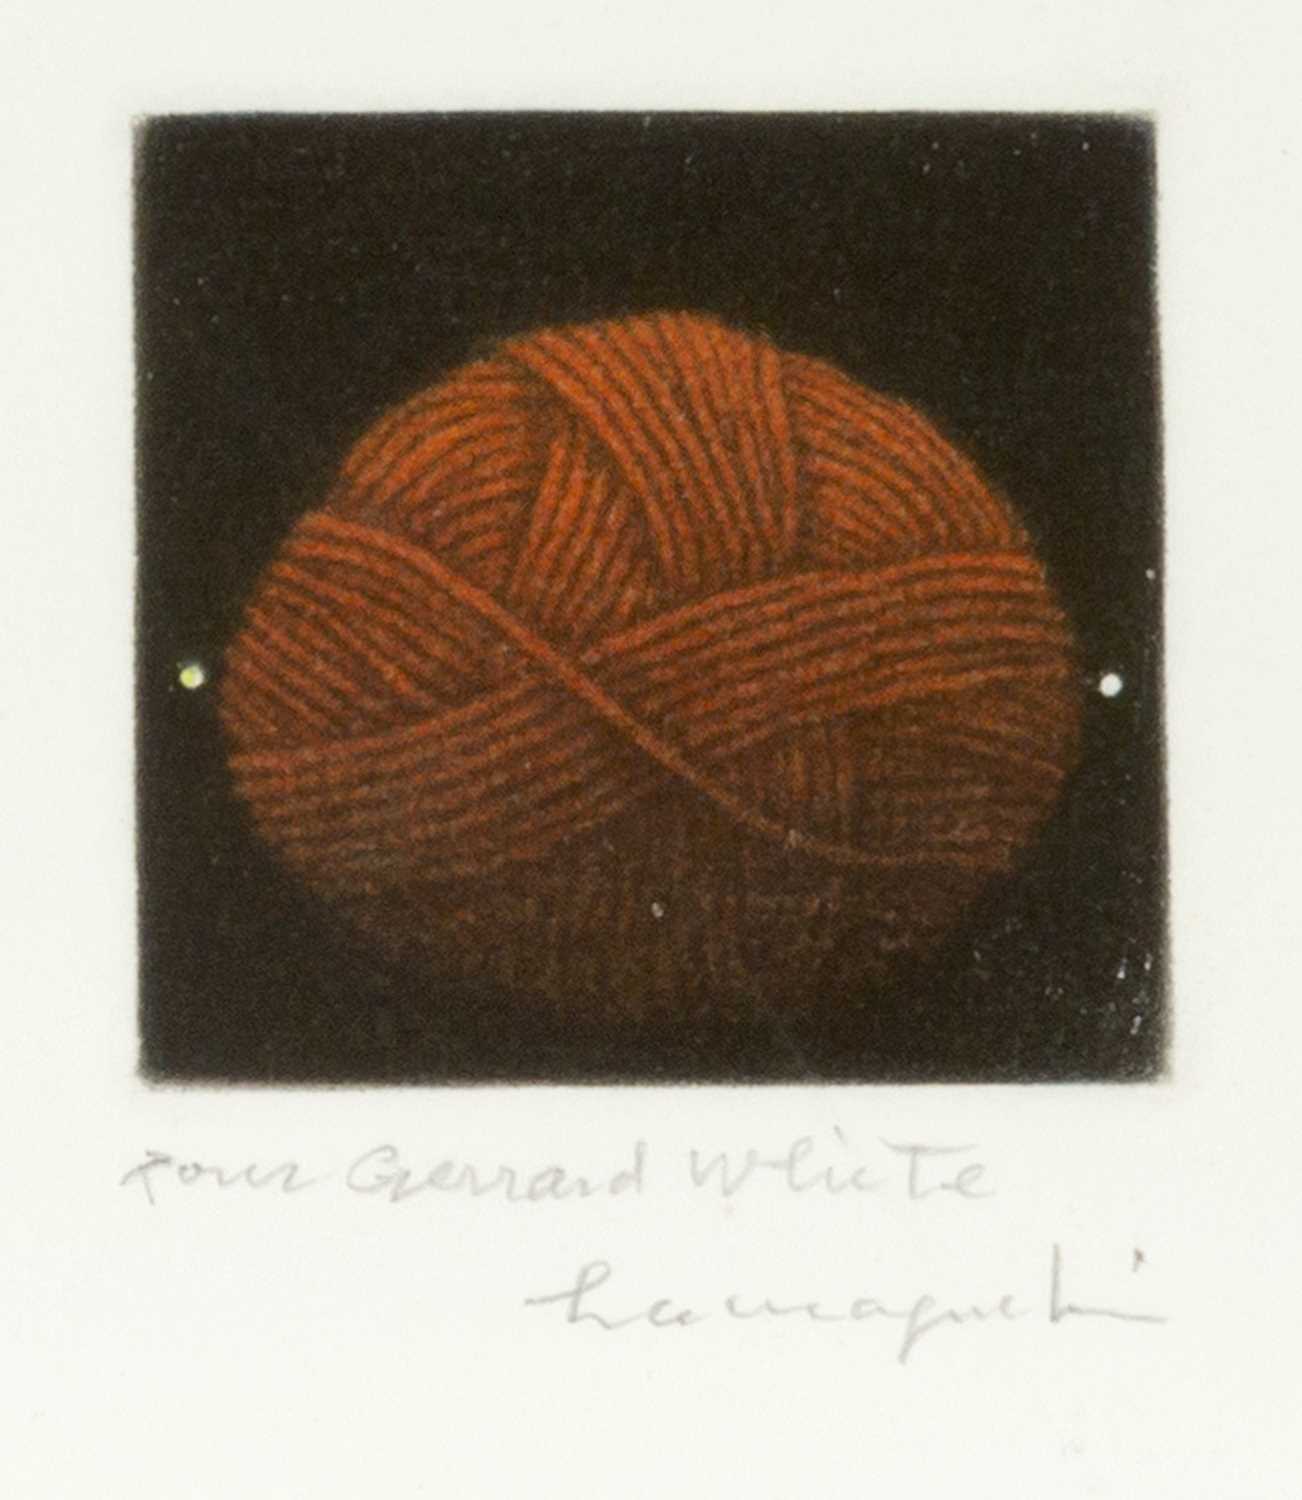 Yozo Hamaguchi (1909-2000) Ball of String signed and inscribed 'For Gerrard White' in pencil (in the